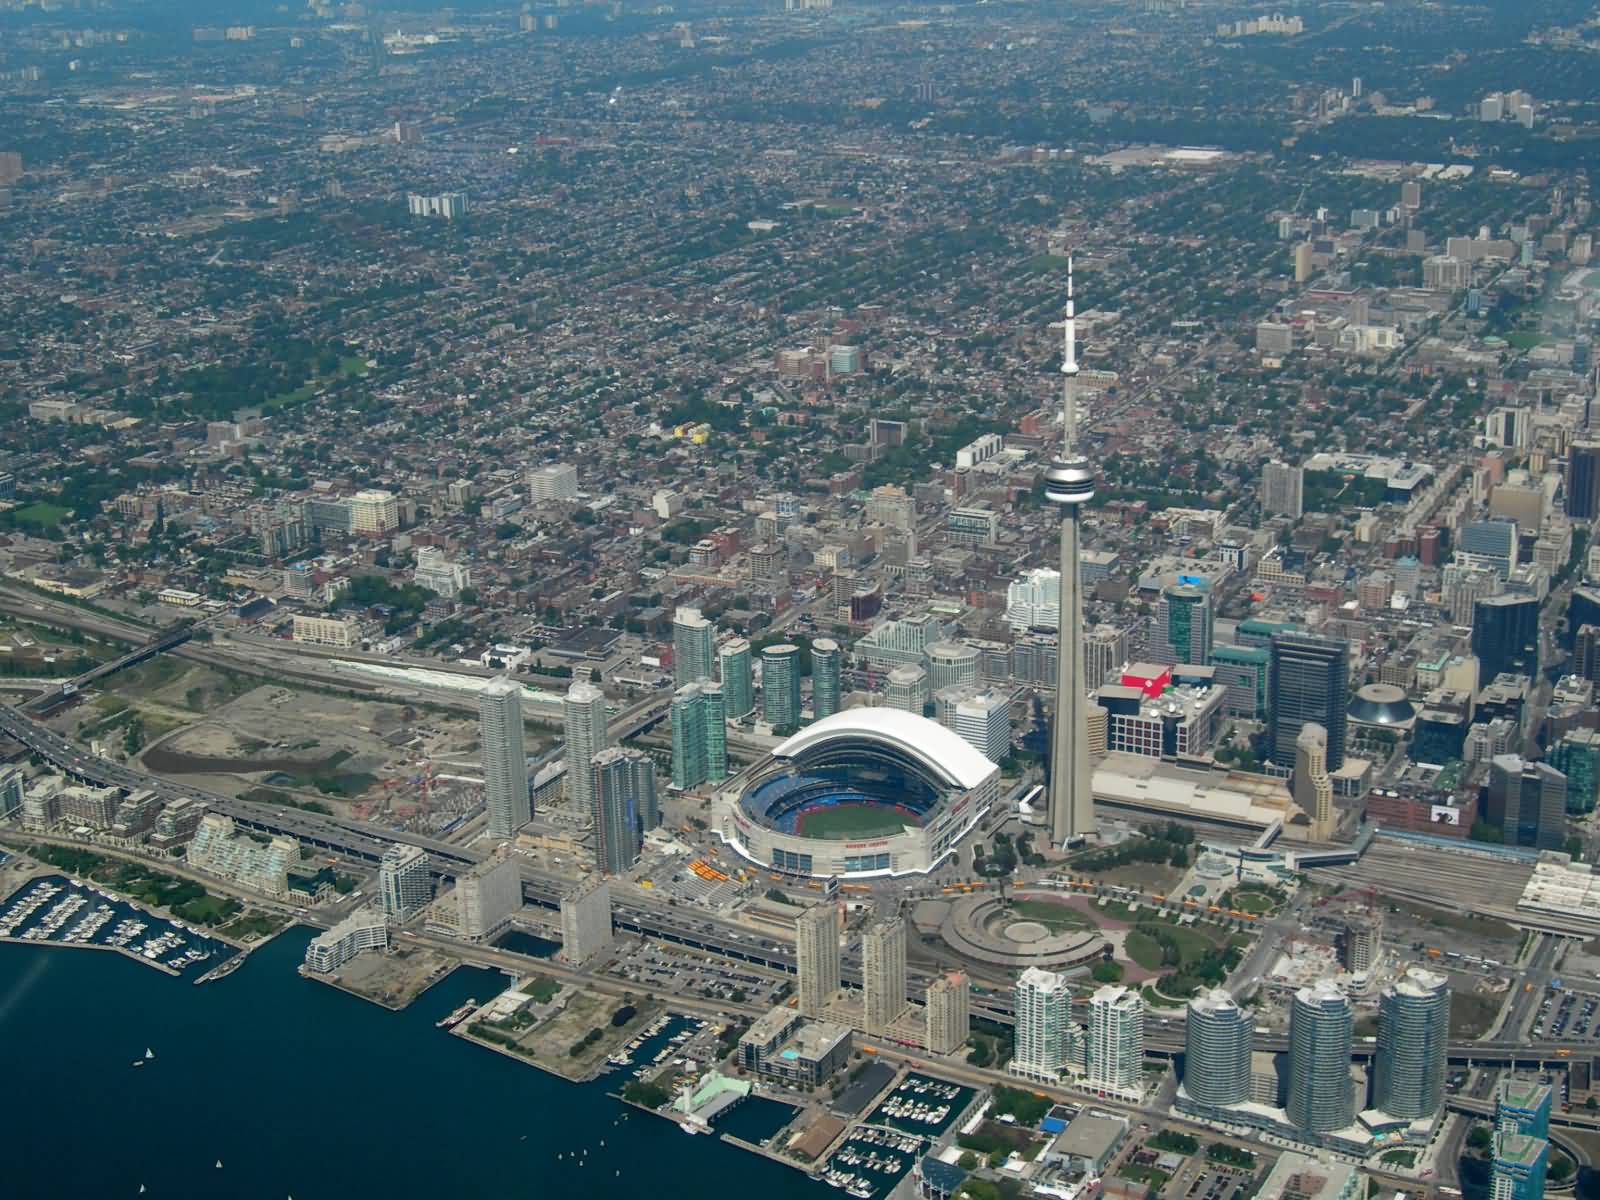 Adorable Aerial View Of CN Tower